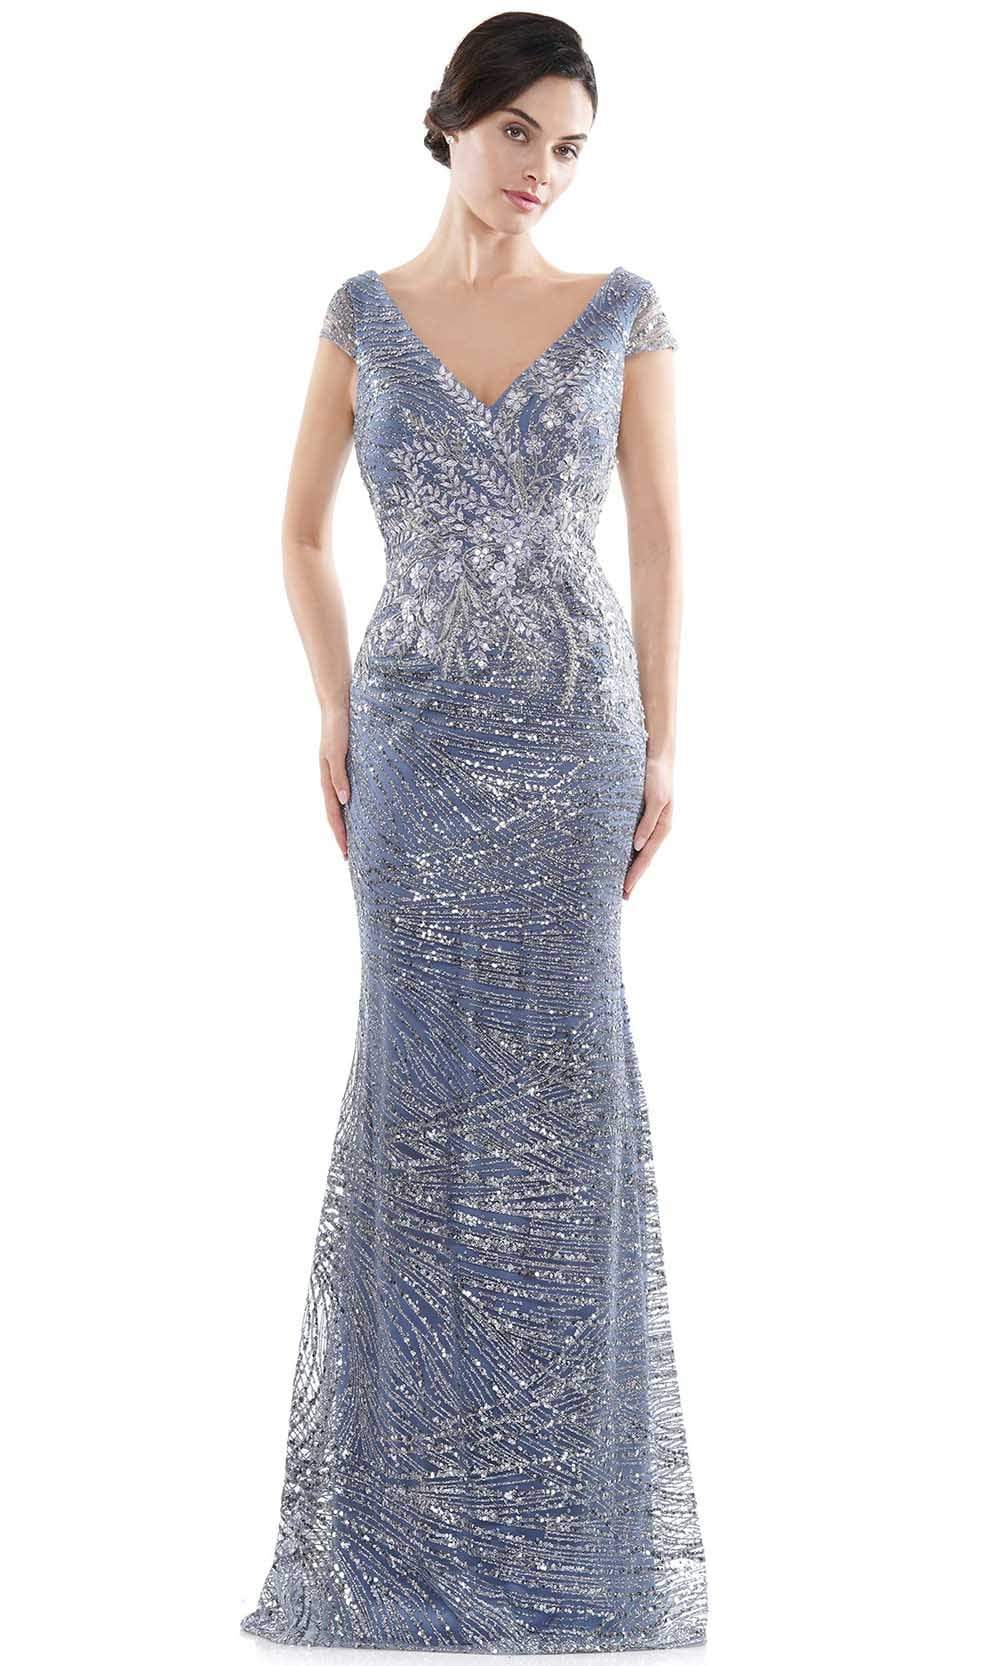 Image of Rina Di Montella - RD2723 V-Neck 3D Floral Appliqued Glitter Gown